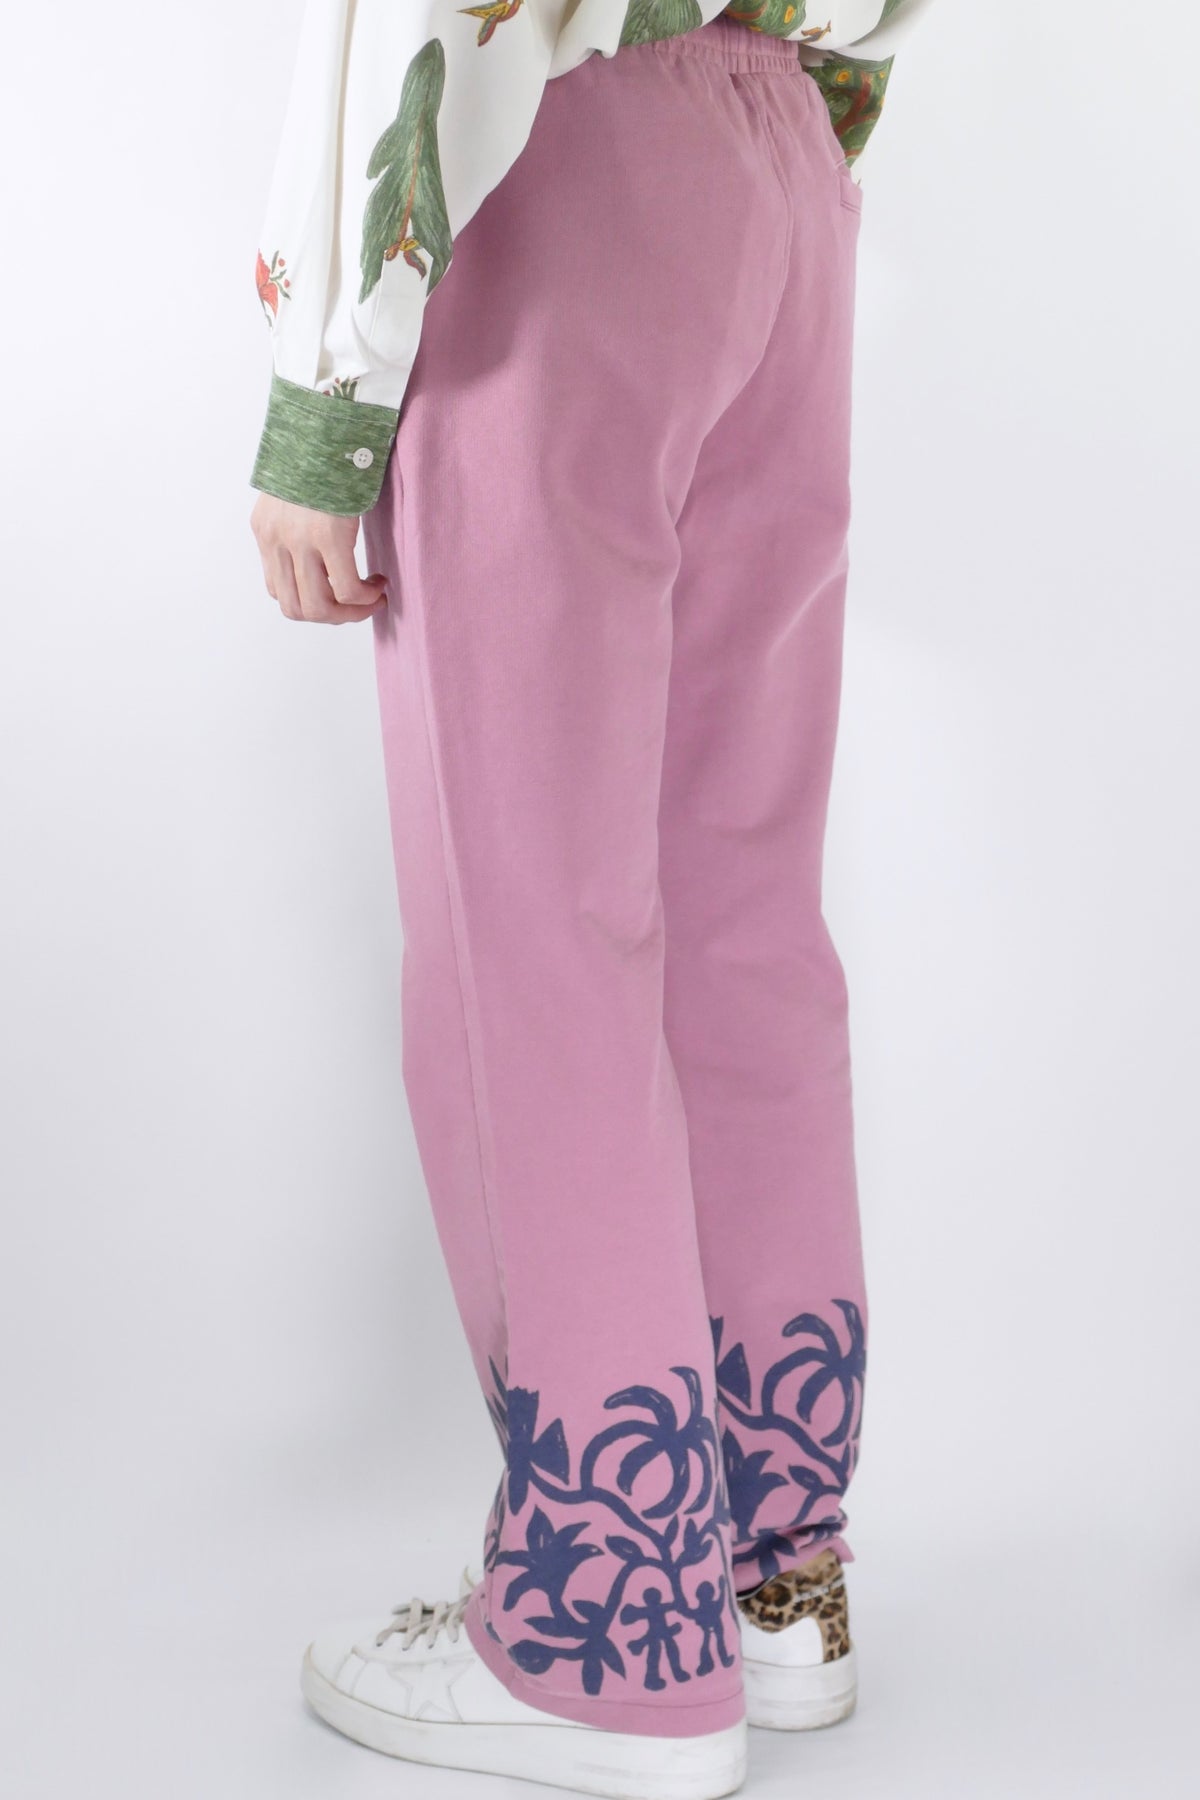 Carne Bollente In the Bush Pant - Washed Pink